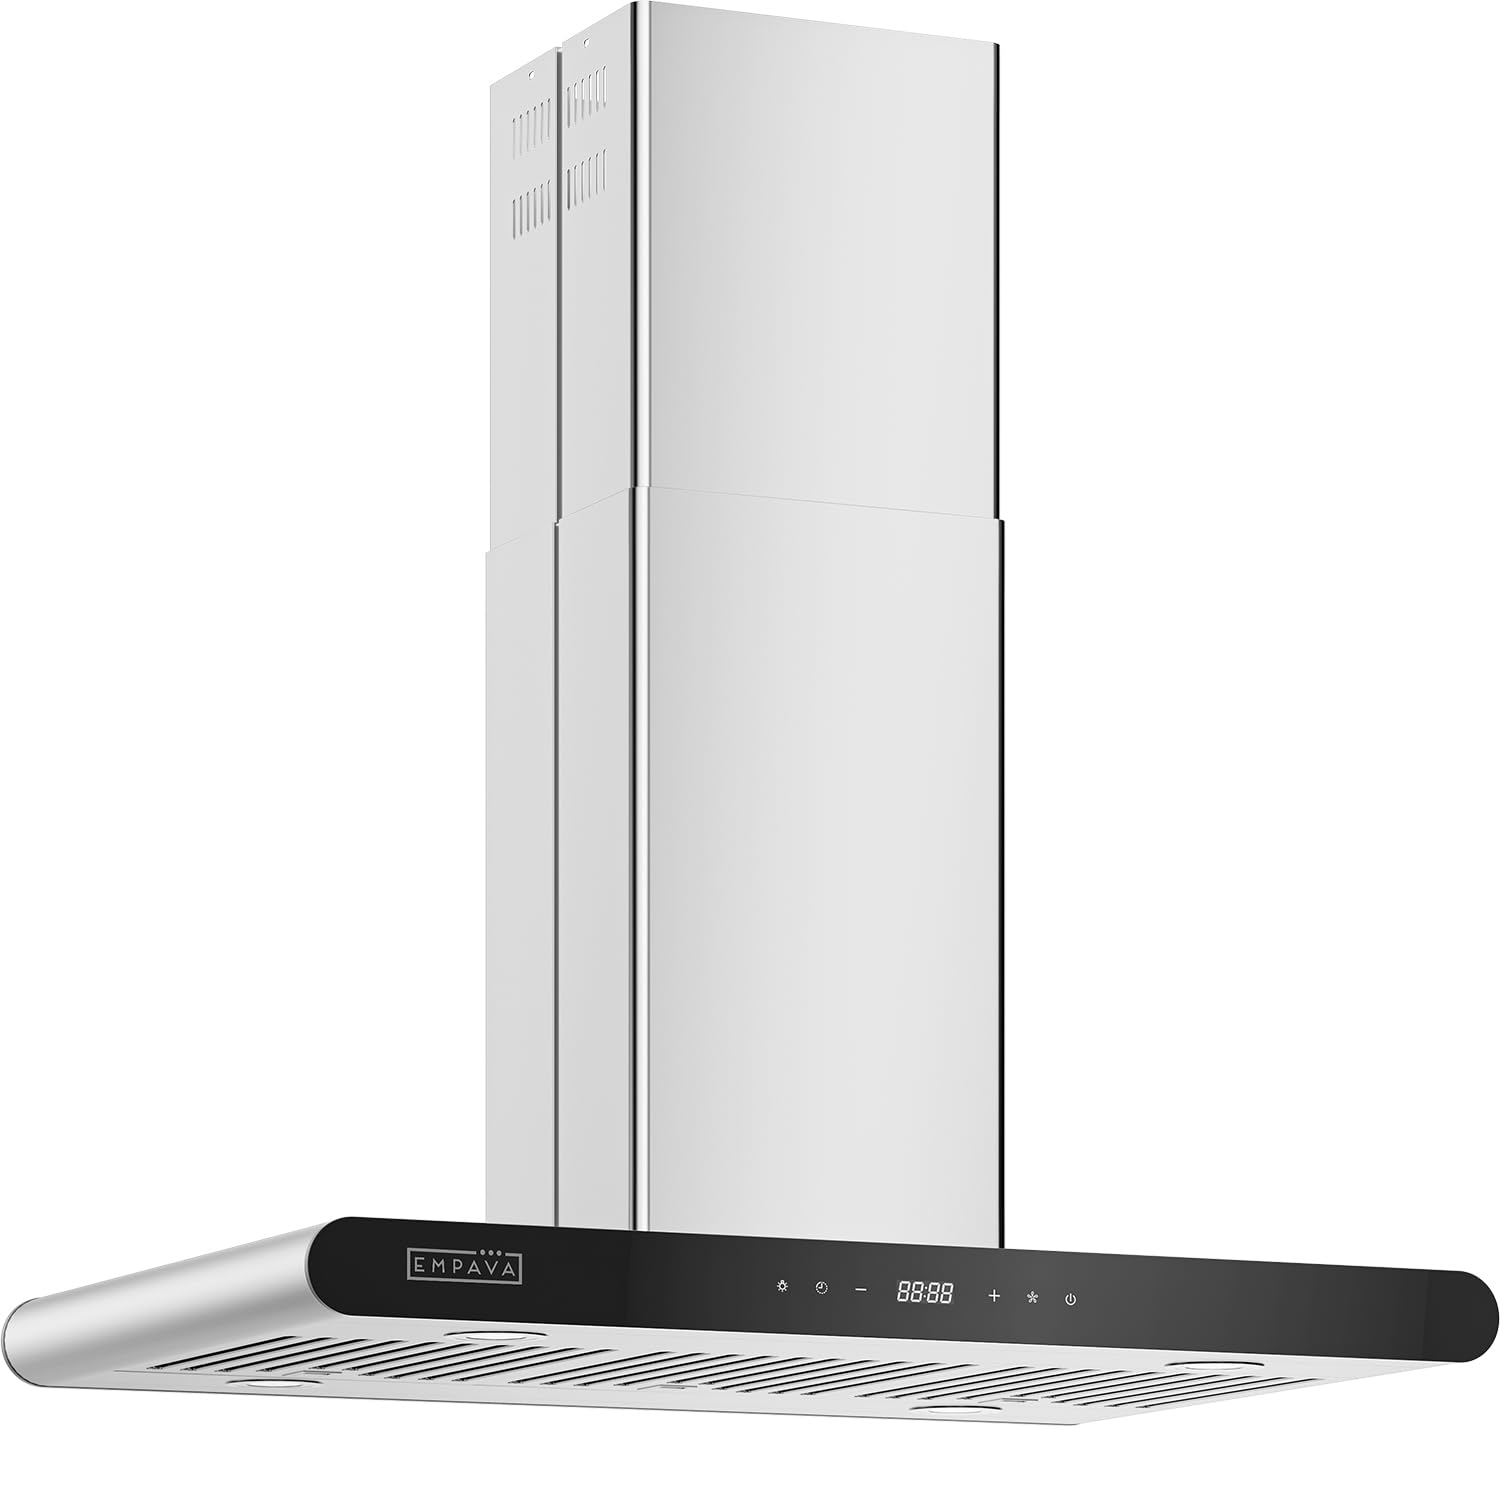 Empava Ducted/Ductless Island Range Hood 36 Inch, Ceiling Mount Kitchen Stove Vent with 400 CFM Dual-Sided Touch Control, 3 Speeds, 4 LED Lights, Stainless Steel (Charcoal-Filter Sold Separately)